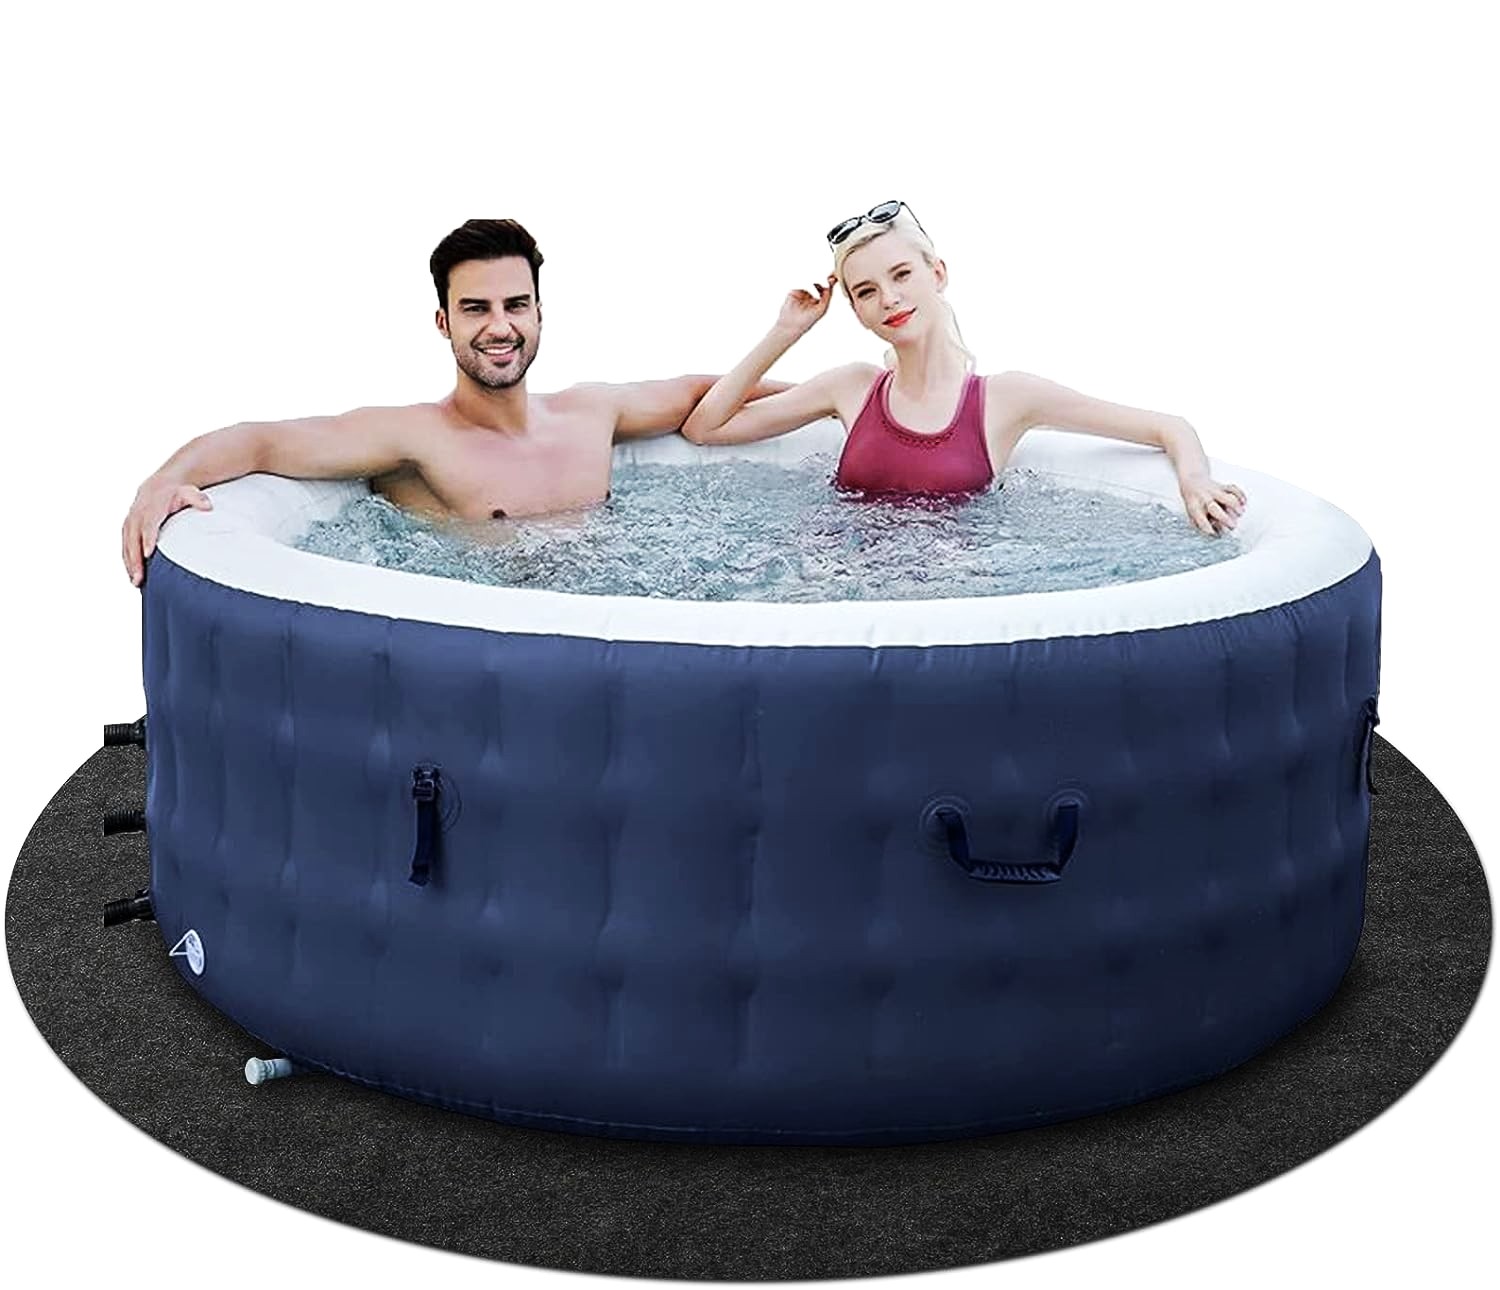 Zomofew Hot Tub Mat — The Most Durable in Use